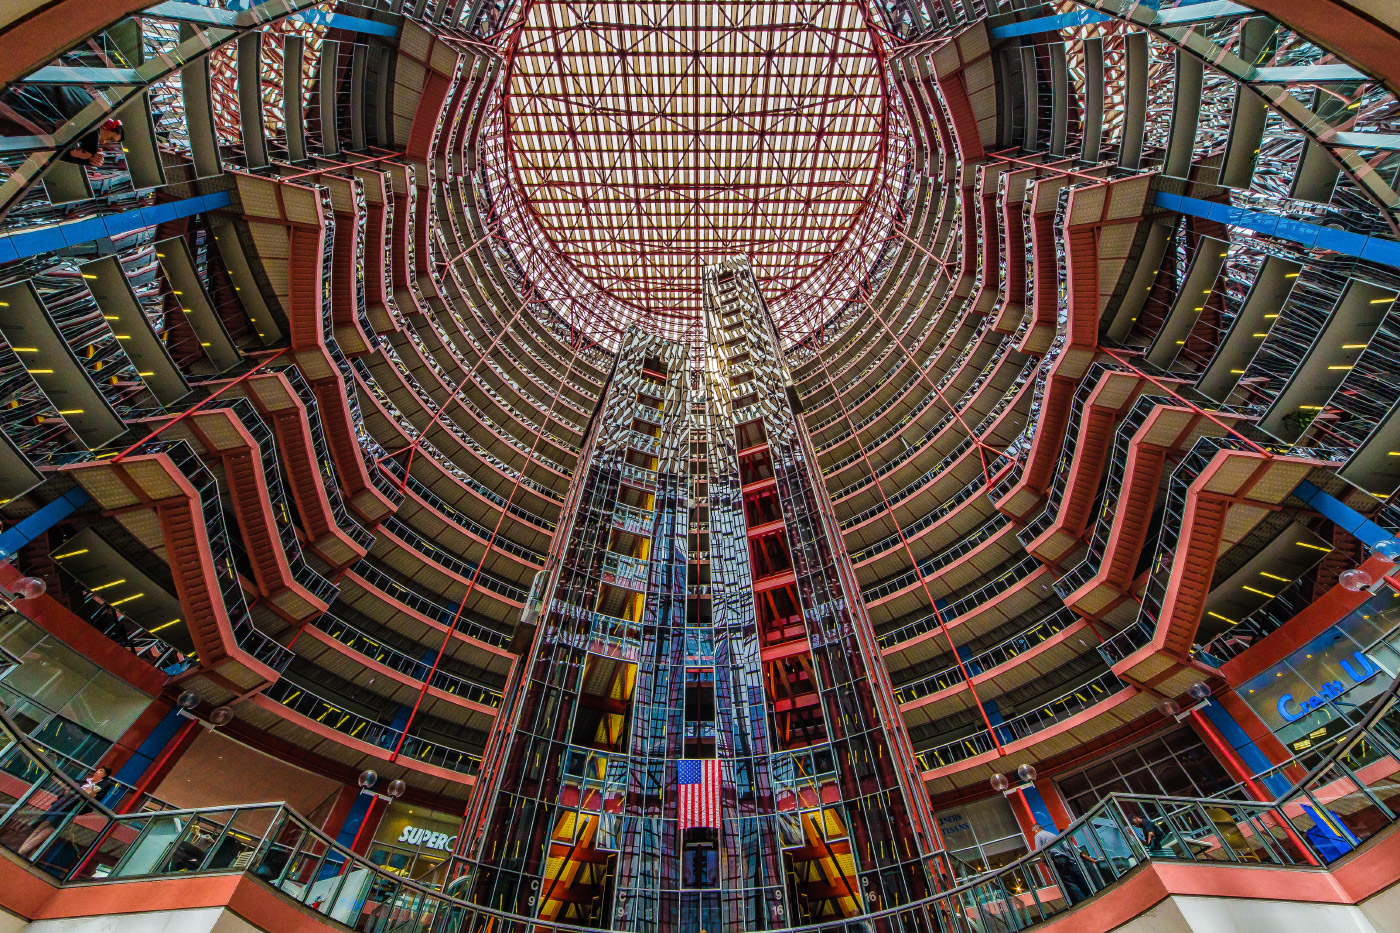 Looking up through the multicolored glass of the Thompson Center atrium